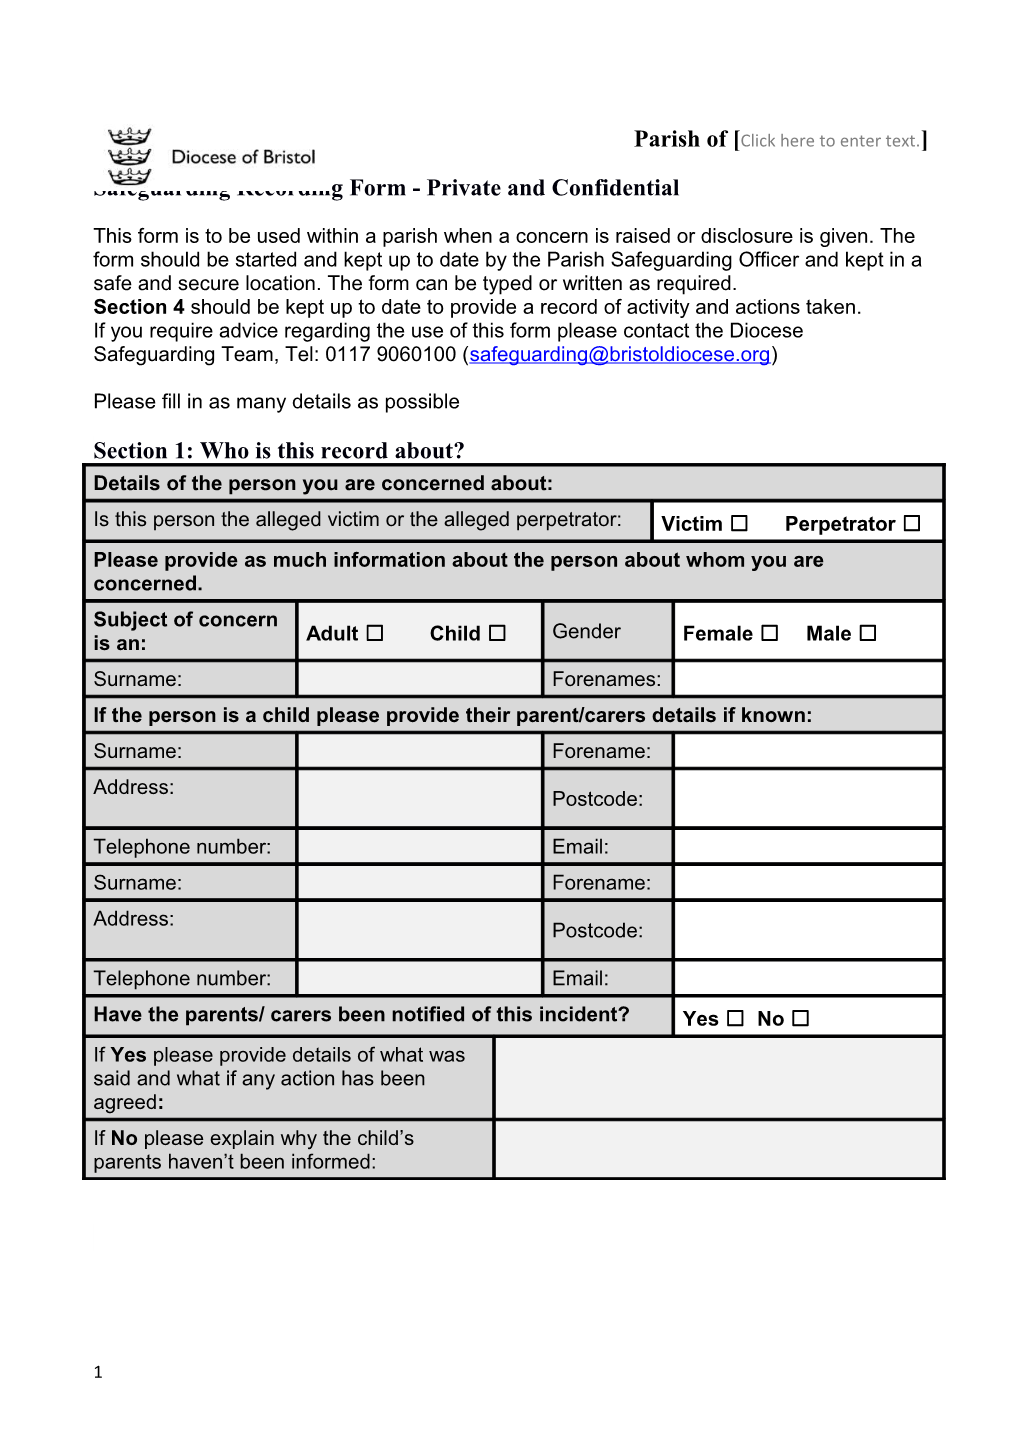 Safeguarding Recording Form - Private and Confidential